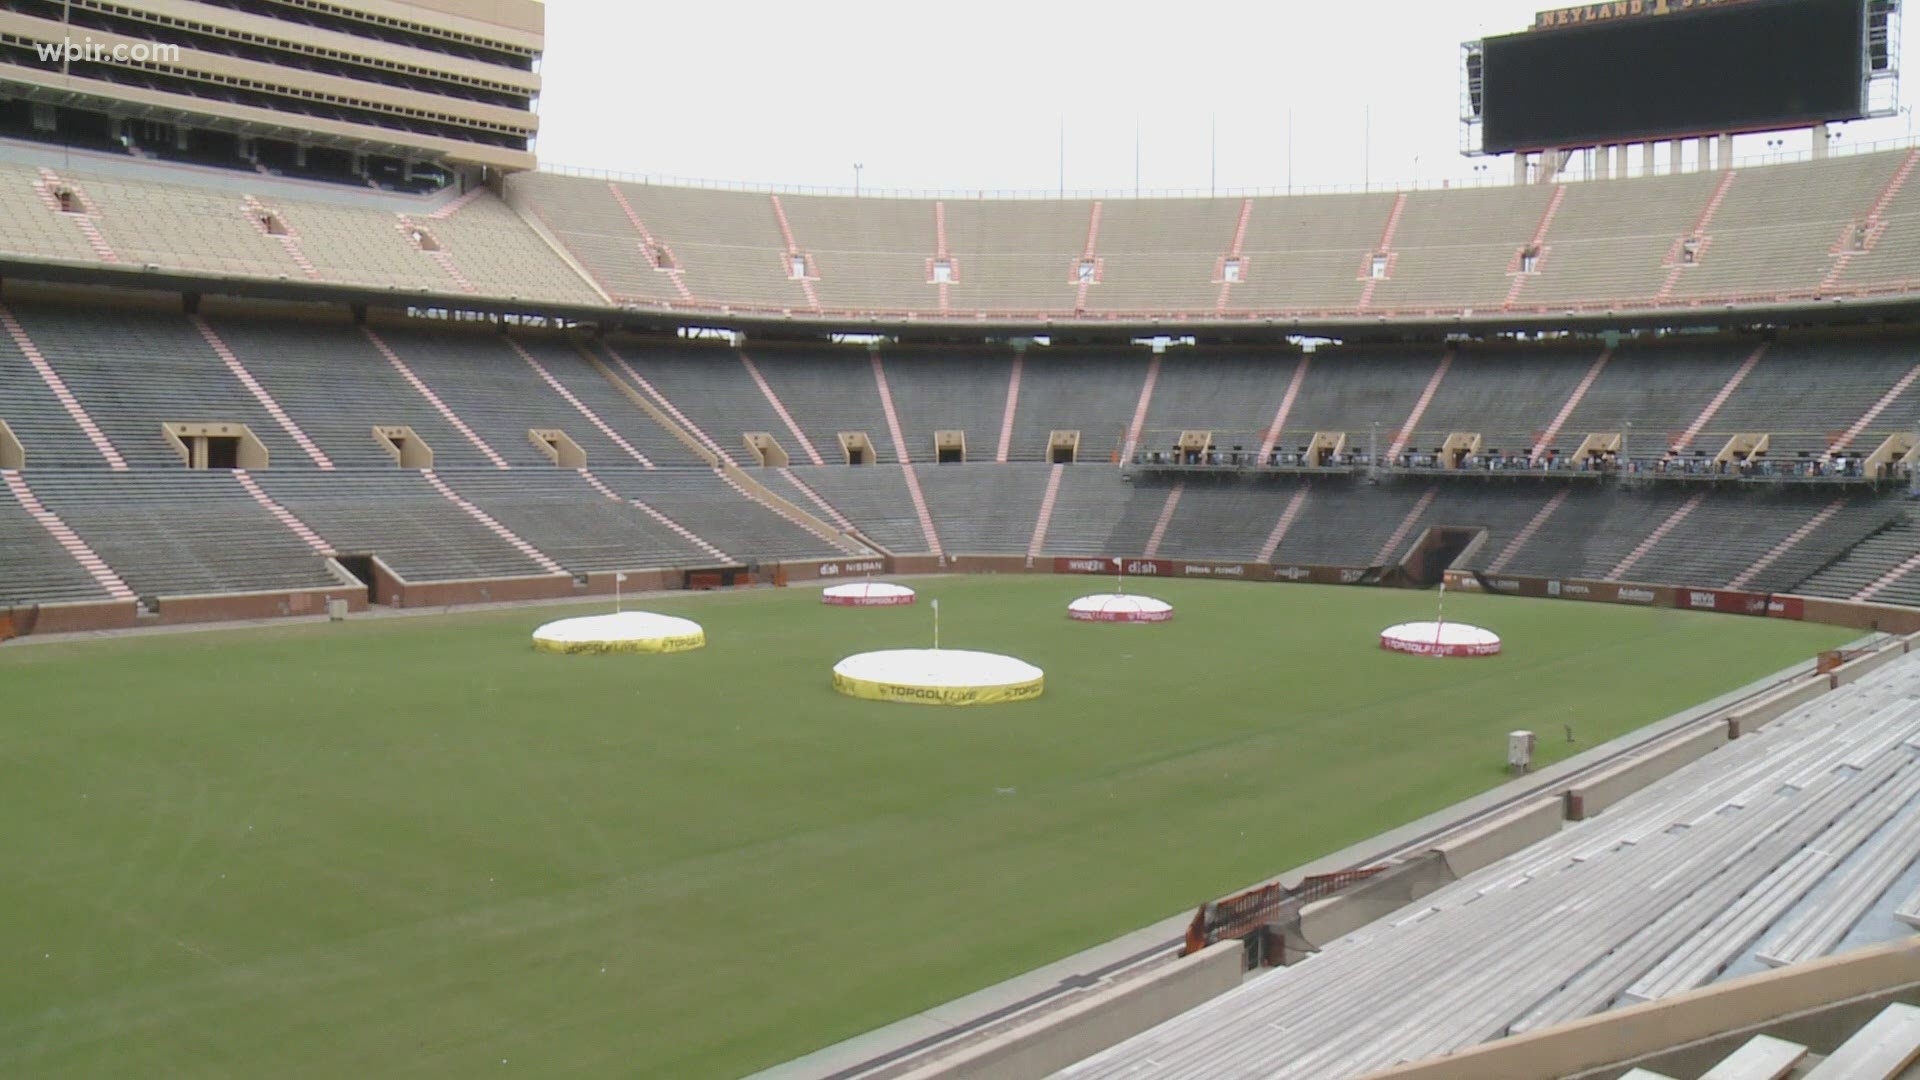 The event will be held at the Neyland Stadium from May 19 to 23.